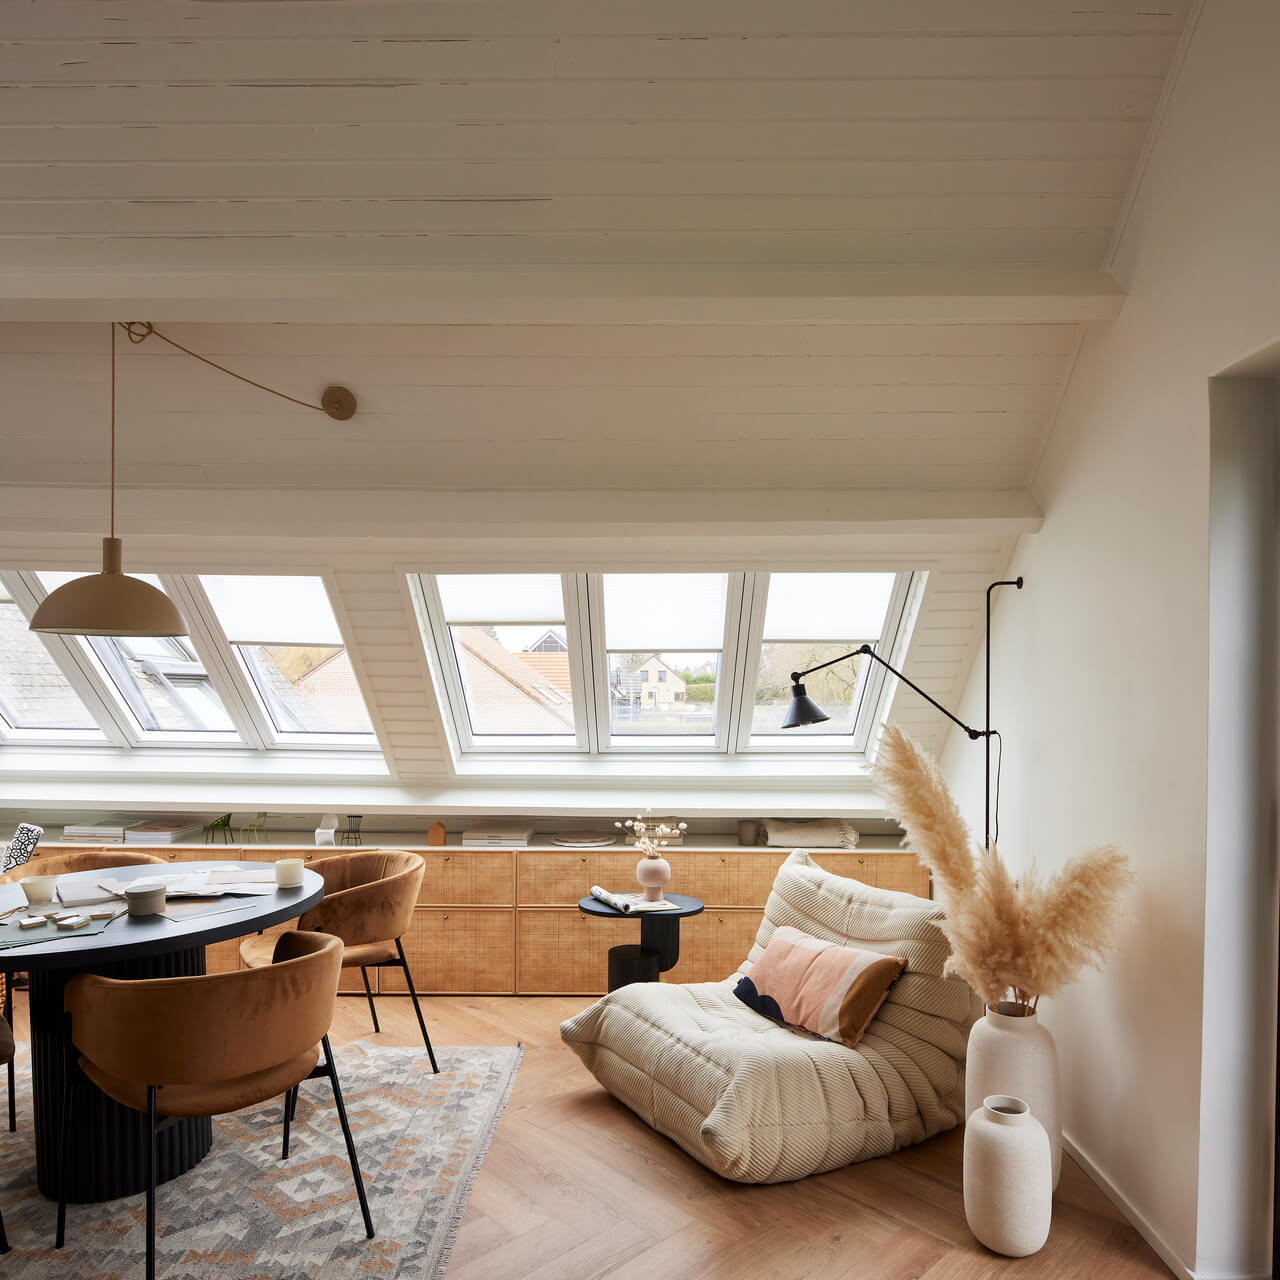 Lounge area in the attic with roof windows.